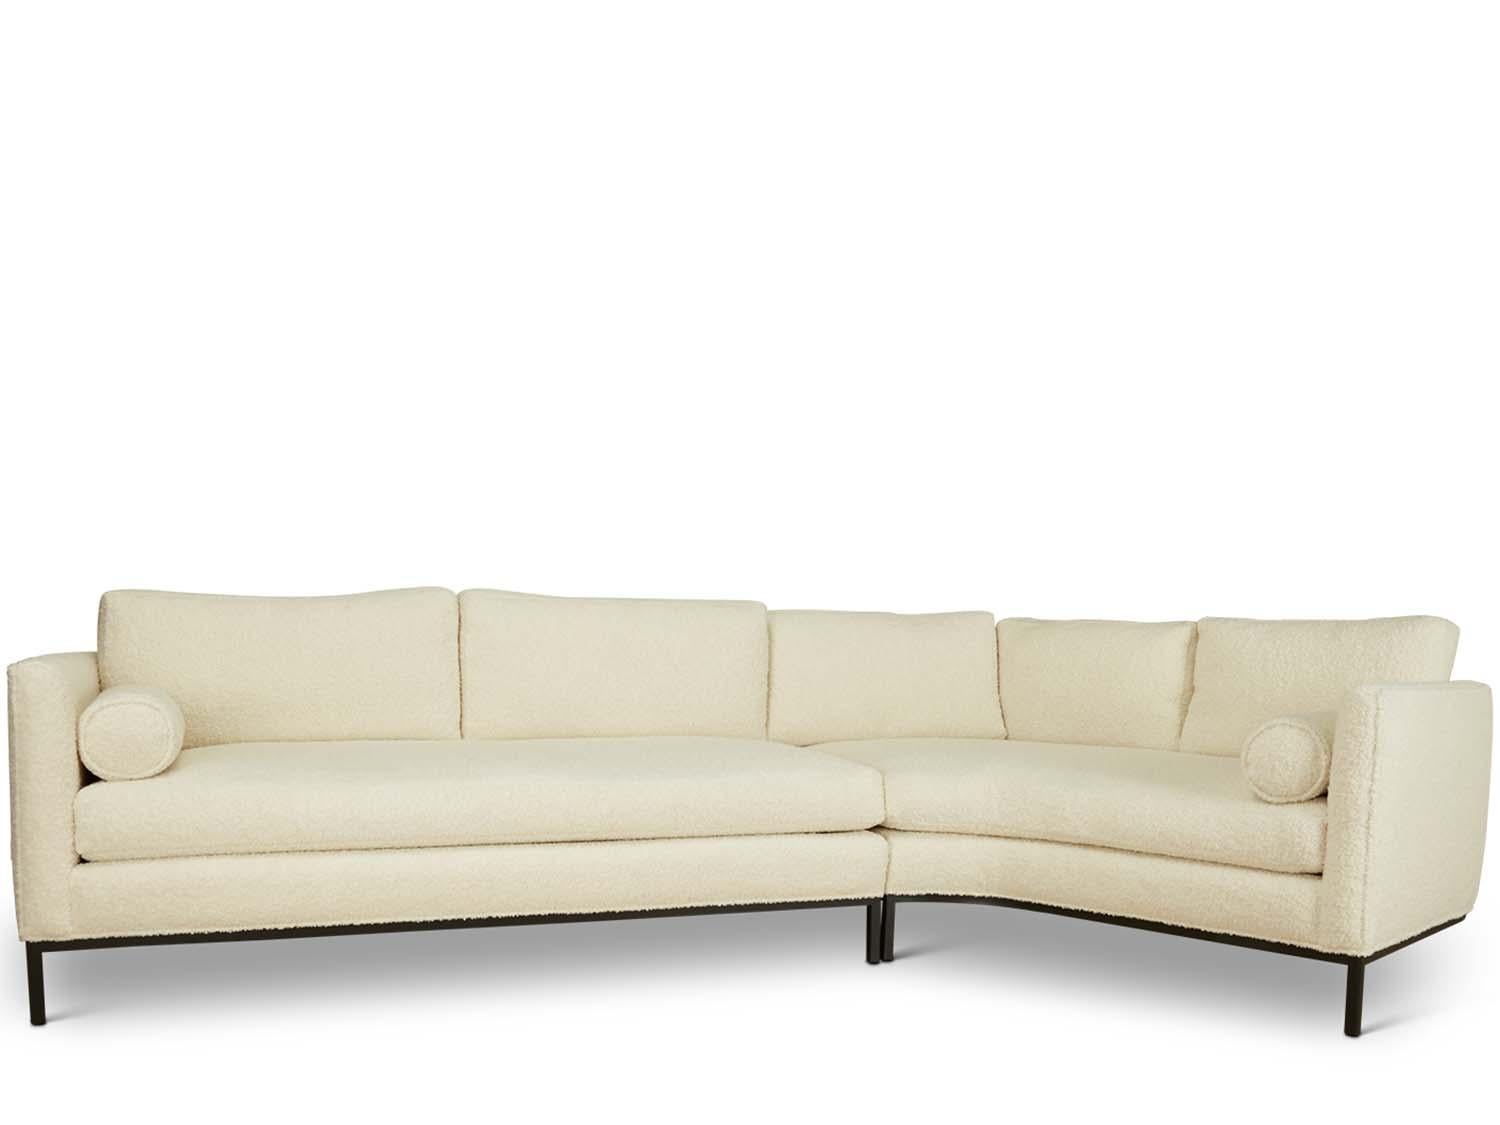 curved back sectional sofa